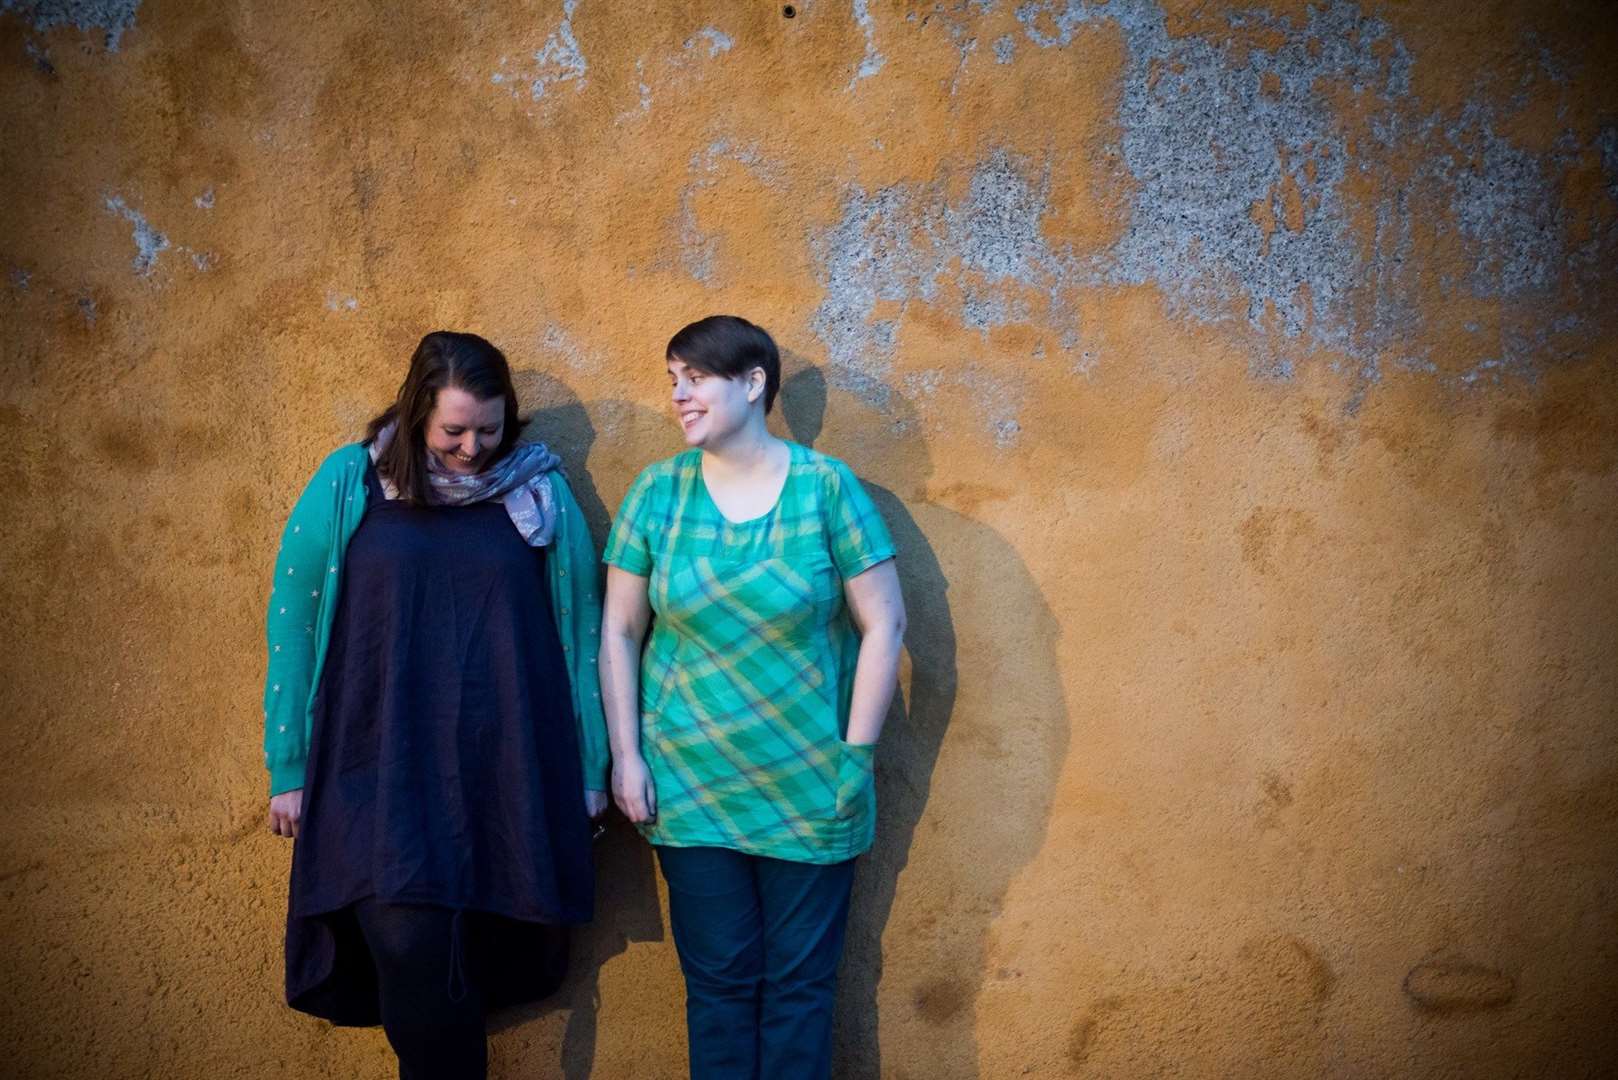 Marit Falt and Rona Wilkie. Picture: Kat Gollock, courtesy of Hippfest.